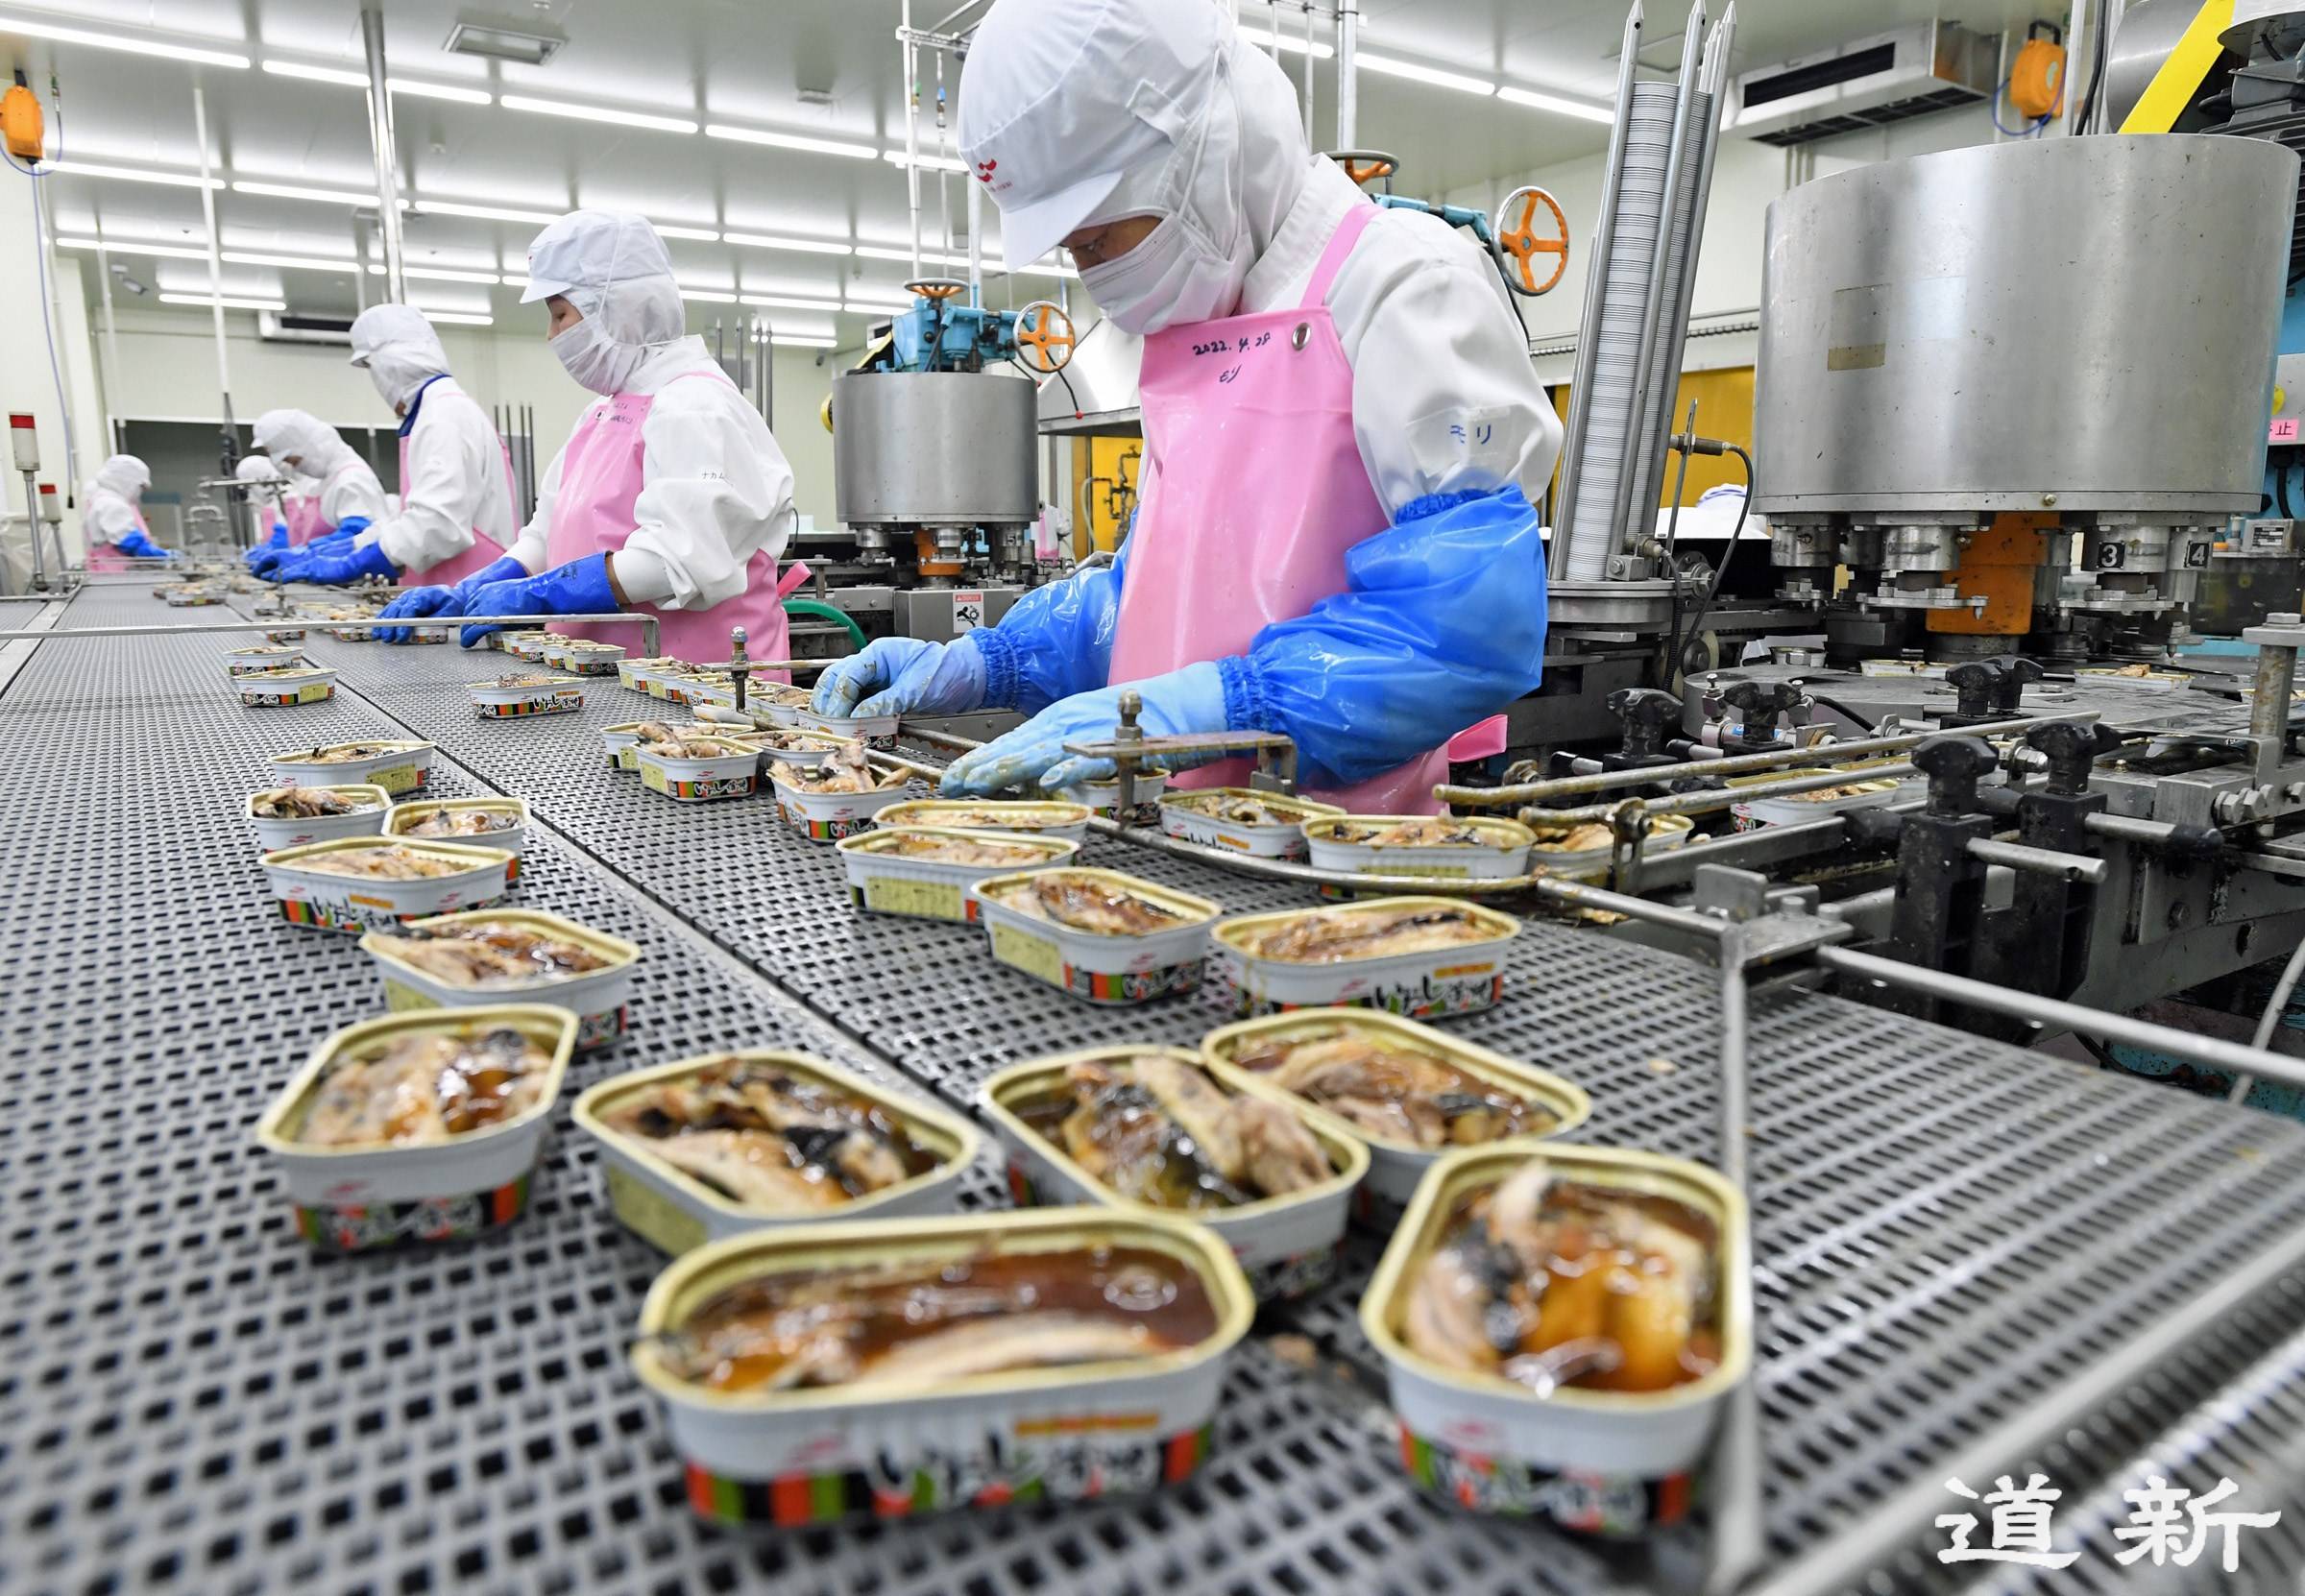 Production line for canned sardines at Maruha Nichiro Kitanippon's Kushiro plant in Hokkaido. The factory is facing rising costs for raw materials and fuel. | HOKKAIDO SHIMBUN